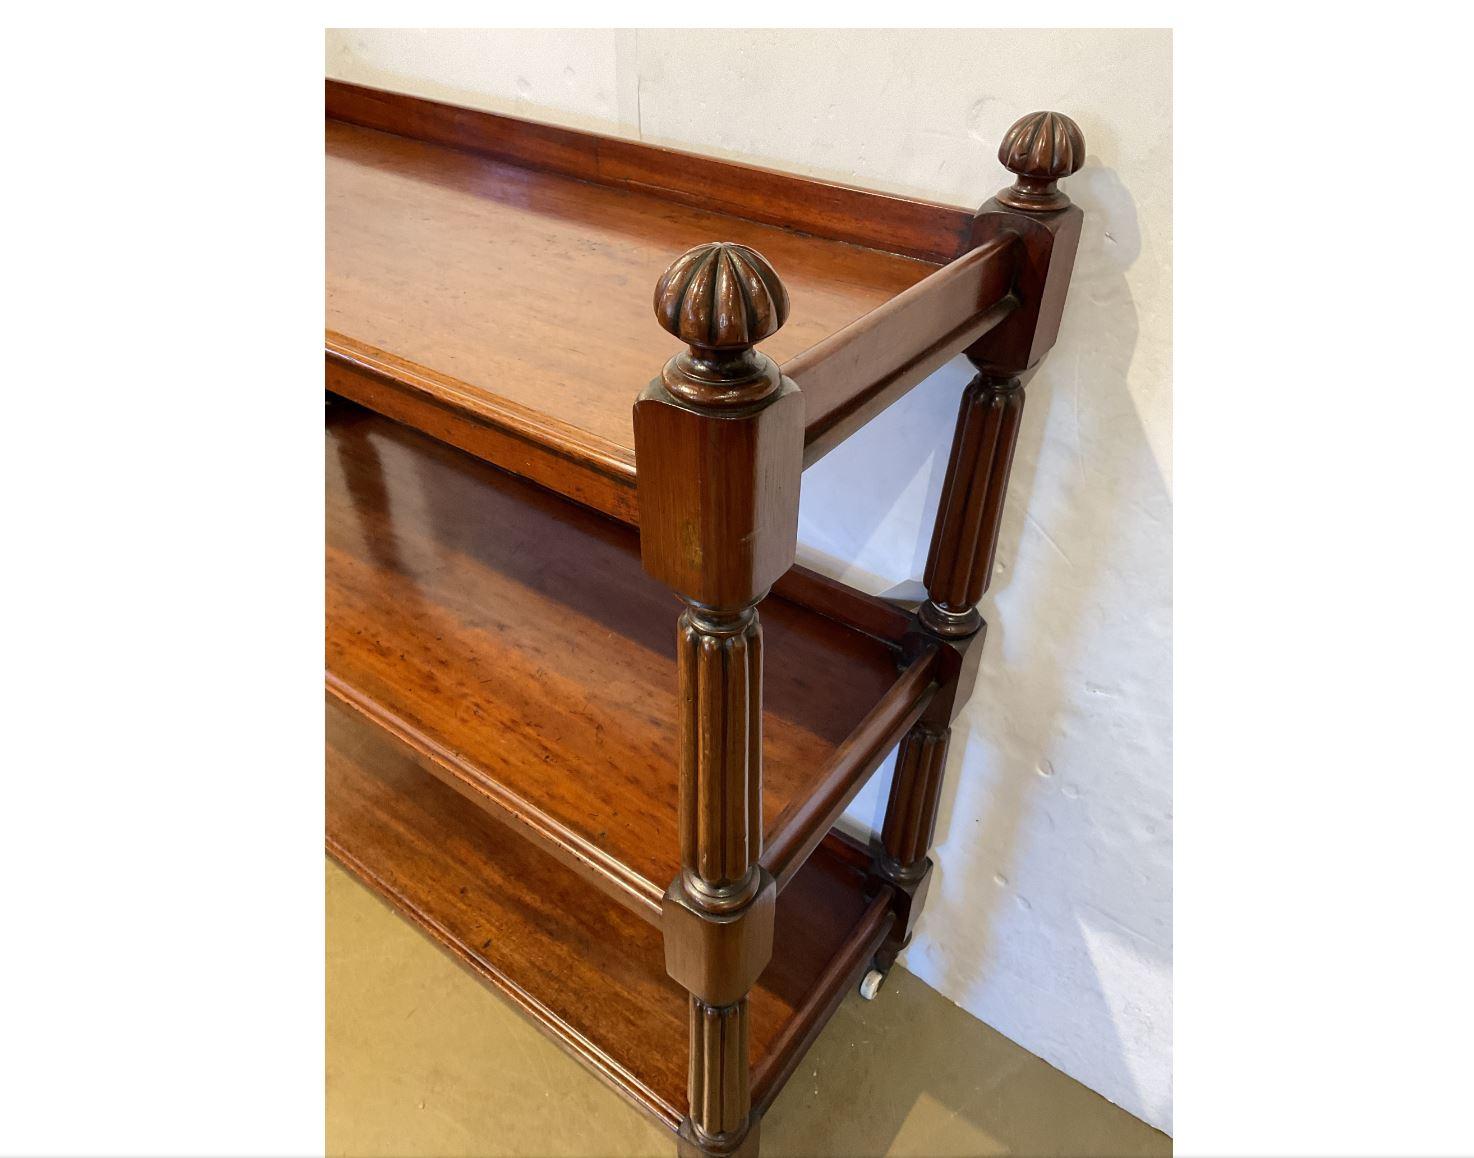 This is a beautiful classic style English dumbwaiter! The rich colored mahogany wood is completed by carved design on the sides and ornamental knobs on the top corners. The server has three roomy shelves and is set on wheels which makes it